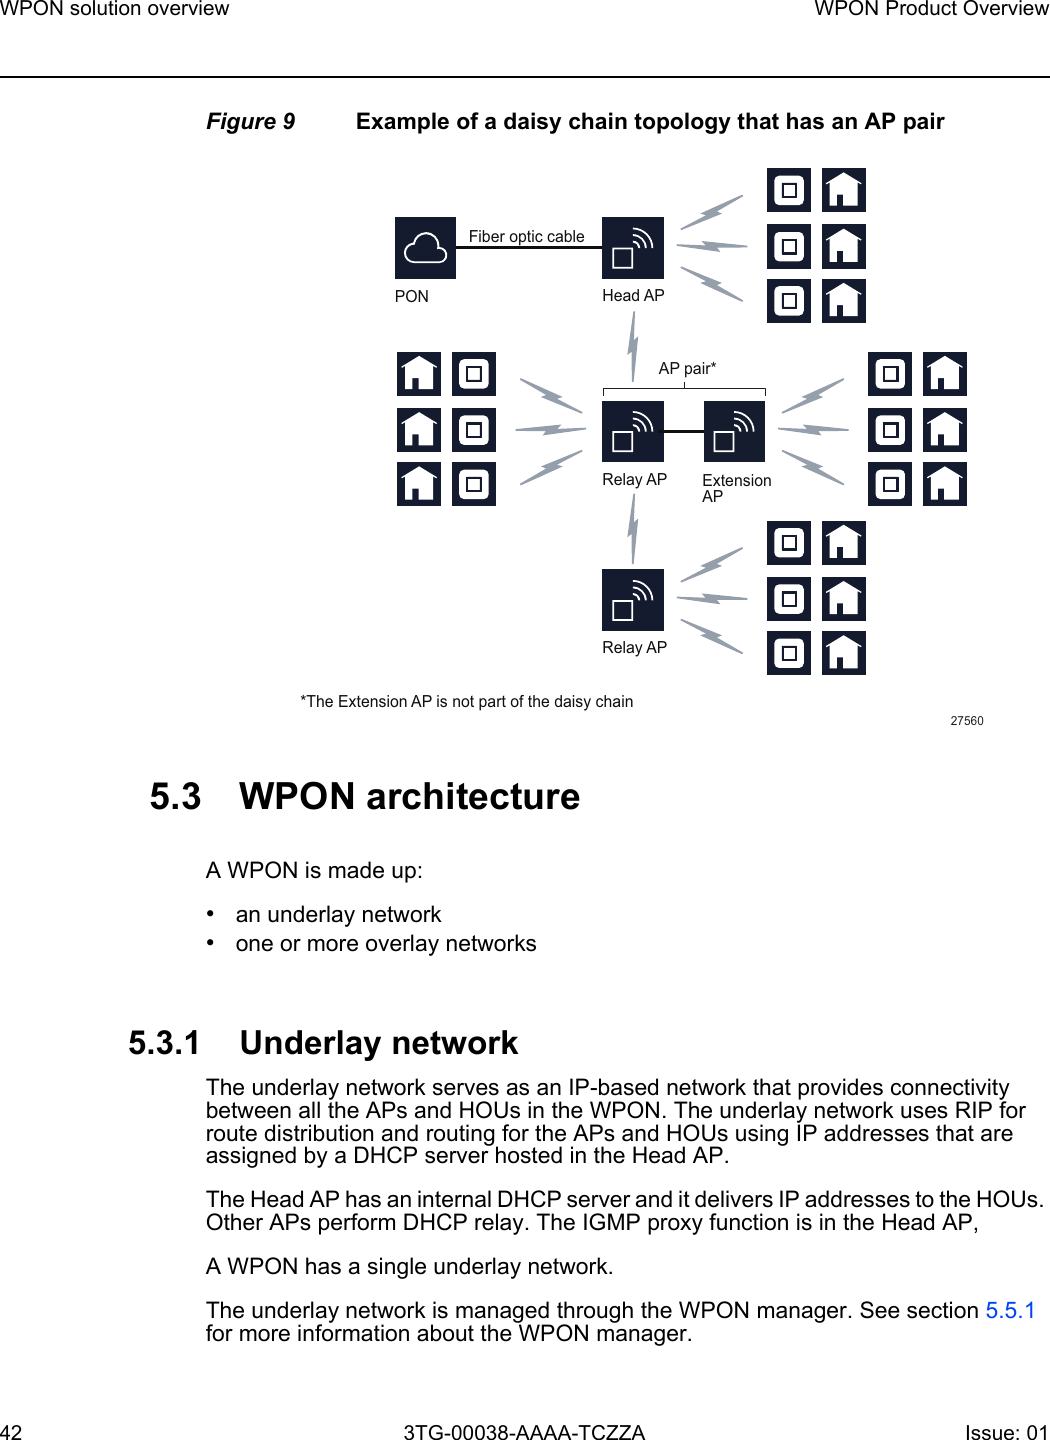 WPON solution overview42WPON Product Overview3TG-00038-AAAA-TCZZA Issue: 01 Figure 9 Example of a daisy chain topology that has an AP pair5.3 WPON architectureA WPON is made up:•an underlay network•one or more overlay networks5.3.1 Underlay networkThe underlay network serves as an IP-based network that provides connectivity between all the APs and HOUs in the WPON. The underlay network uses RIP for route distribution and routing for the APs and HOUs using IP addresses that are assigned by a DHCP server hosted in the Head AP. The Head AP has an internal DHCP server and it delivers IP addresses to the HOUs. Other APs perform DHCP relay. The IGMP proxy function is in the Head AP,A WPON has a single underlay network.The underlay network is managed through the WPON manager. See section 5.5.1 for more information about the WPON manager.Head APPONFiber optic cable27560Relay APRelay AP ExtensionAPAP pair**The Extension AP is not part of the daisy chain